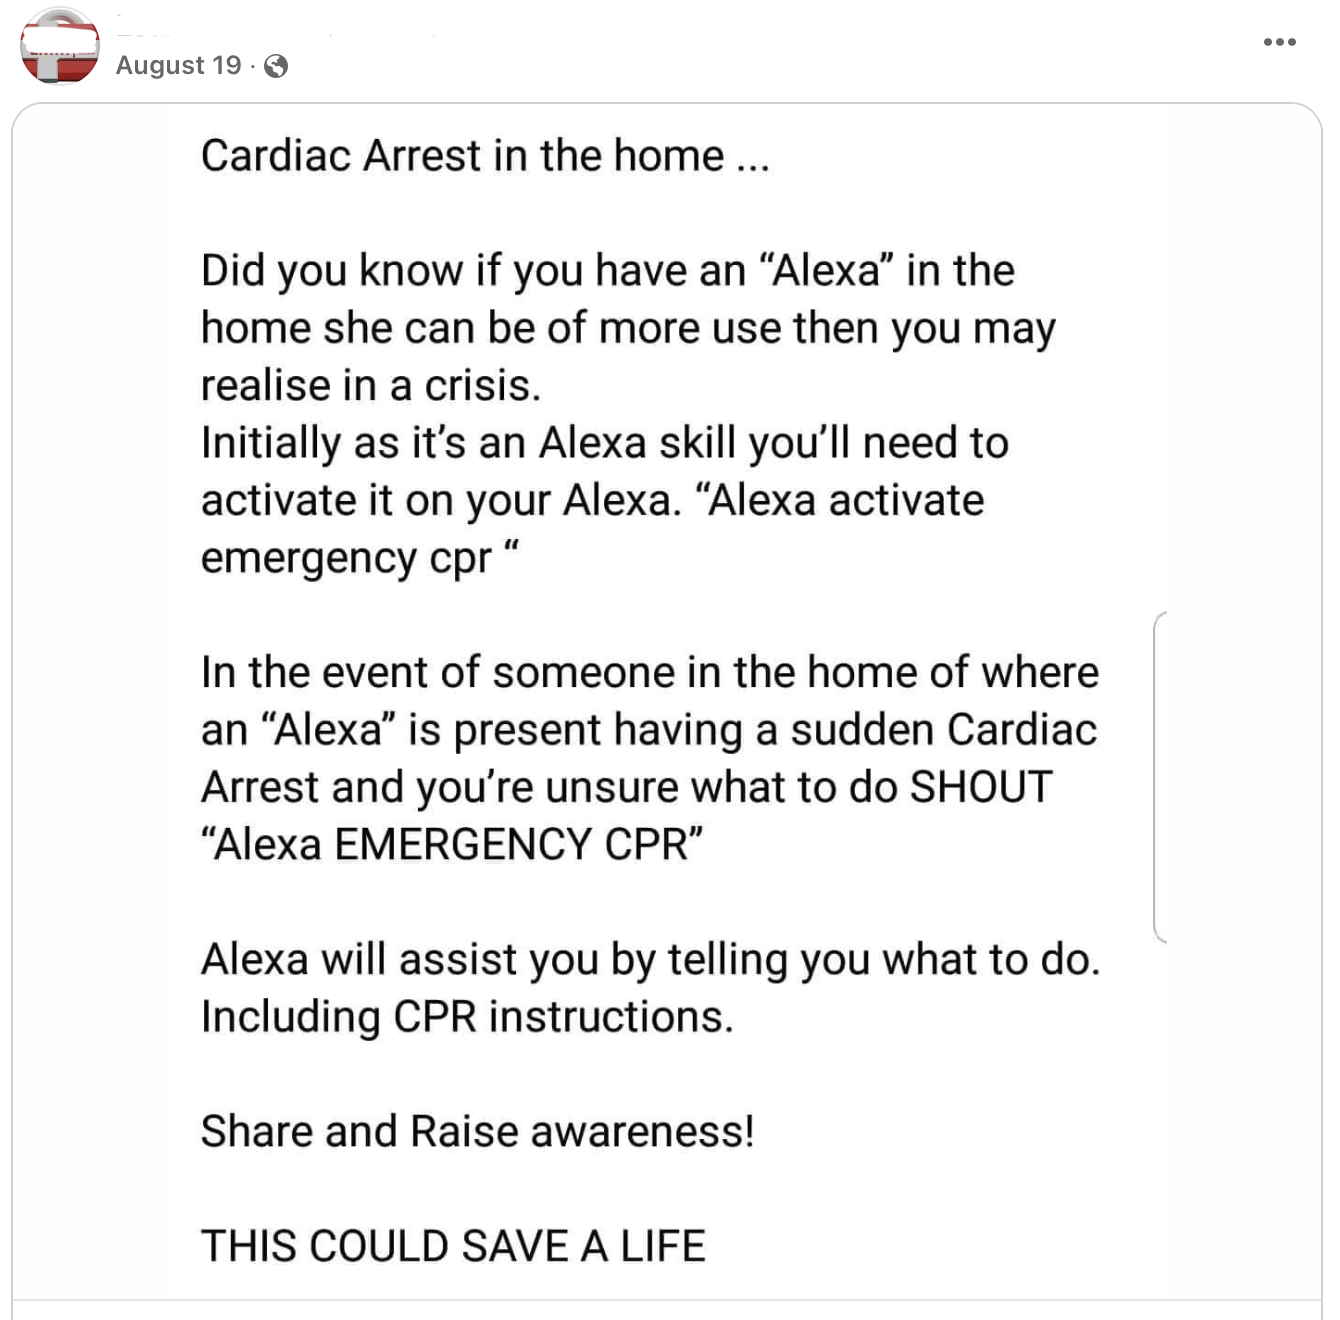 Blog - Should I ask Alexa what to do in a Cardiac Arrest?